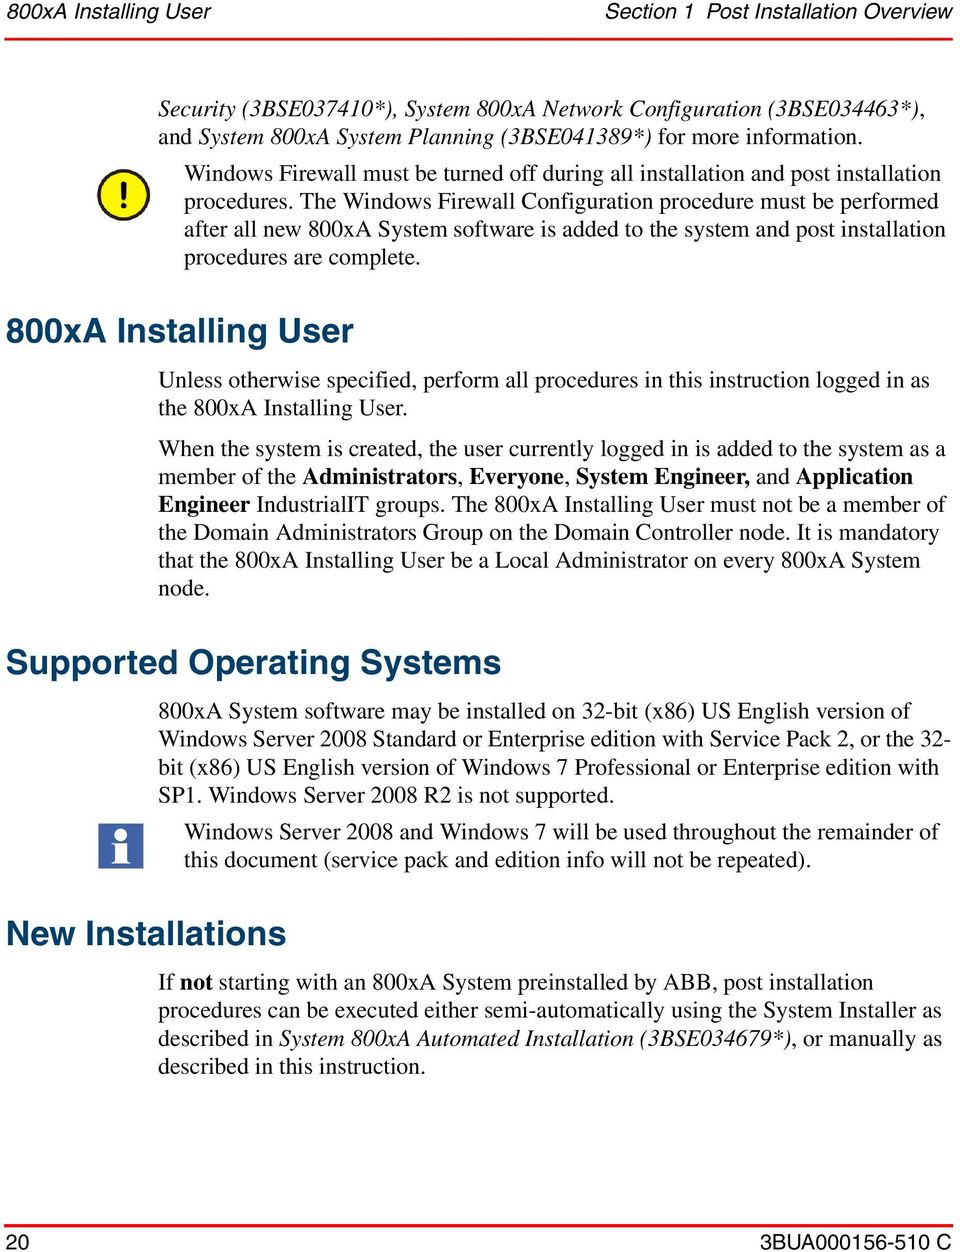 The Windows Firewall Configuration procedure must be performed after all new 800xA System software is added to the system and post installation procedures are complete.